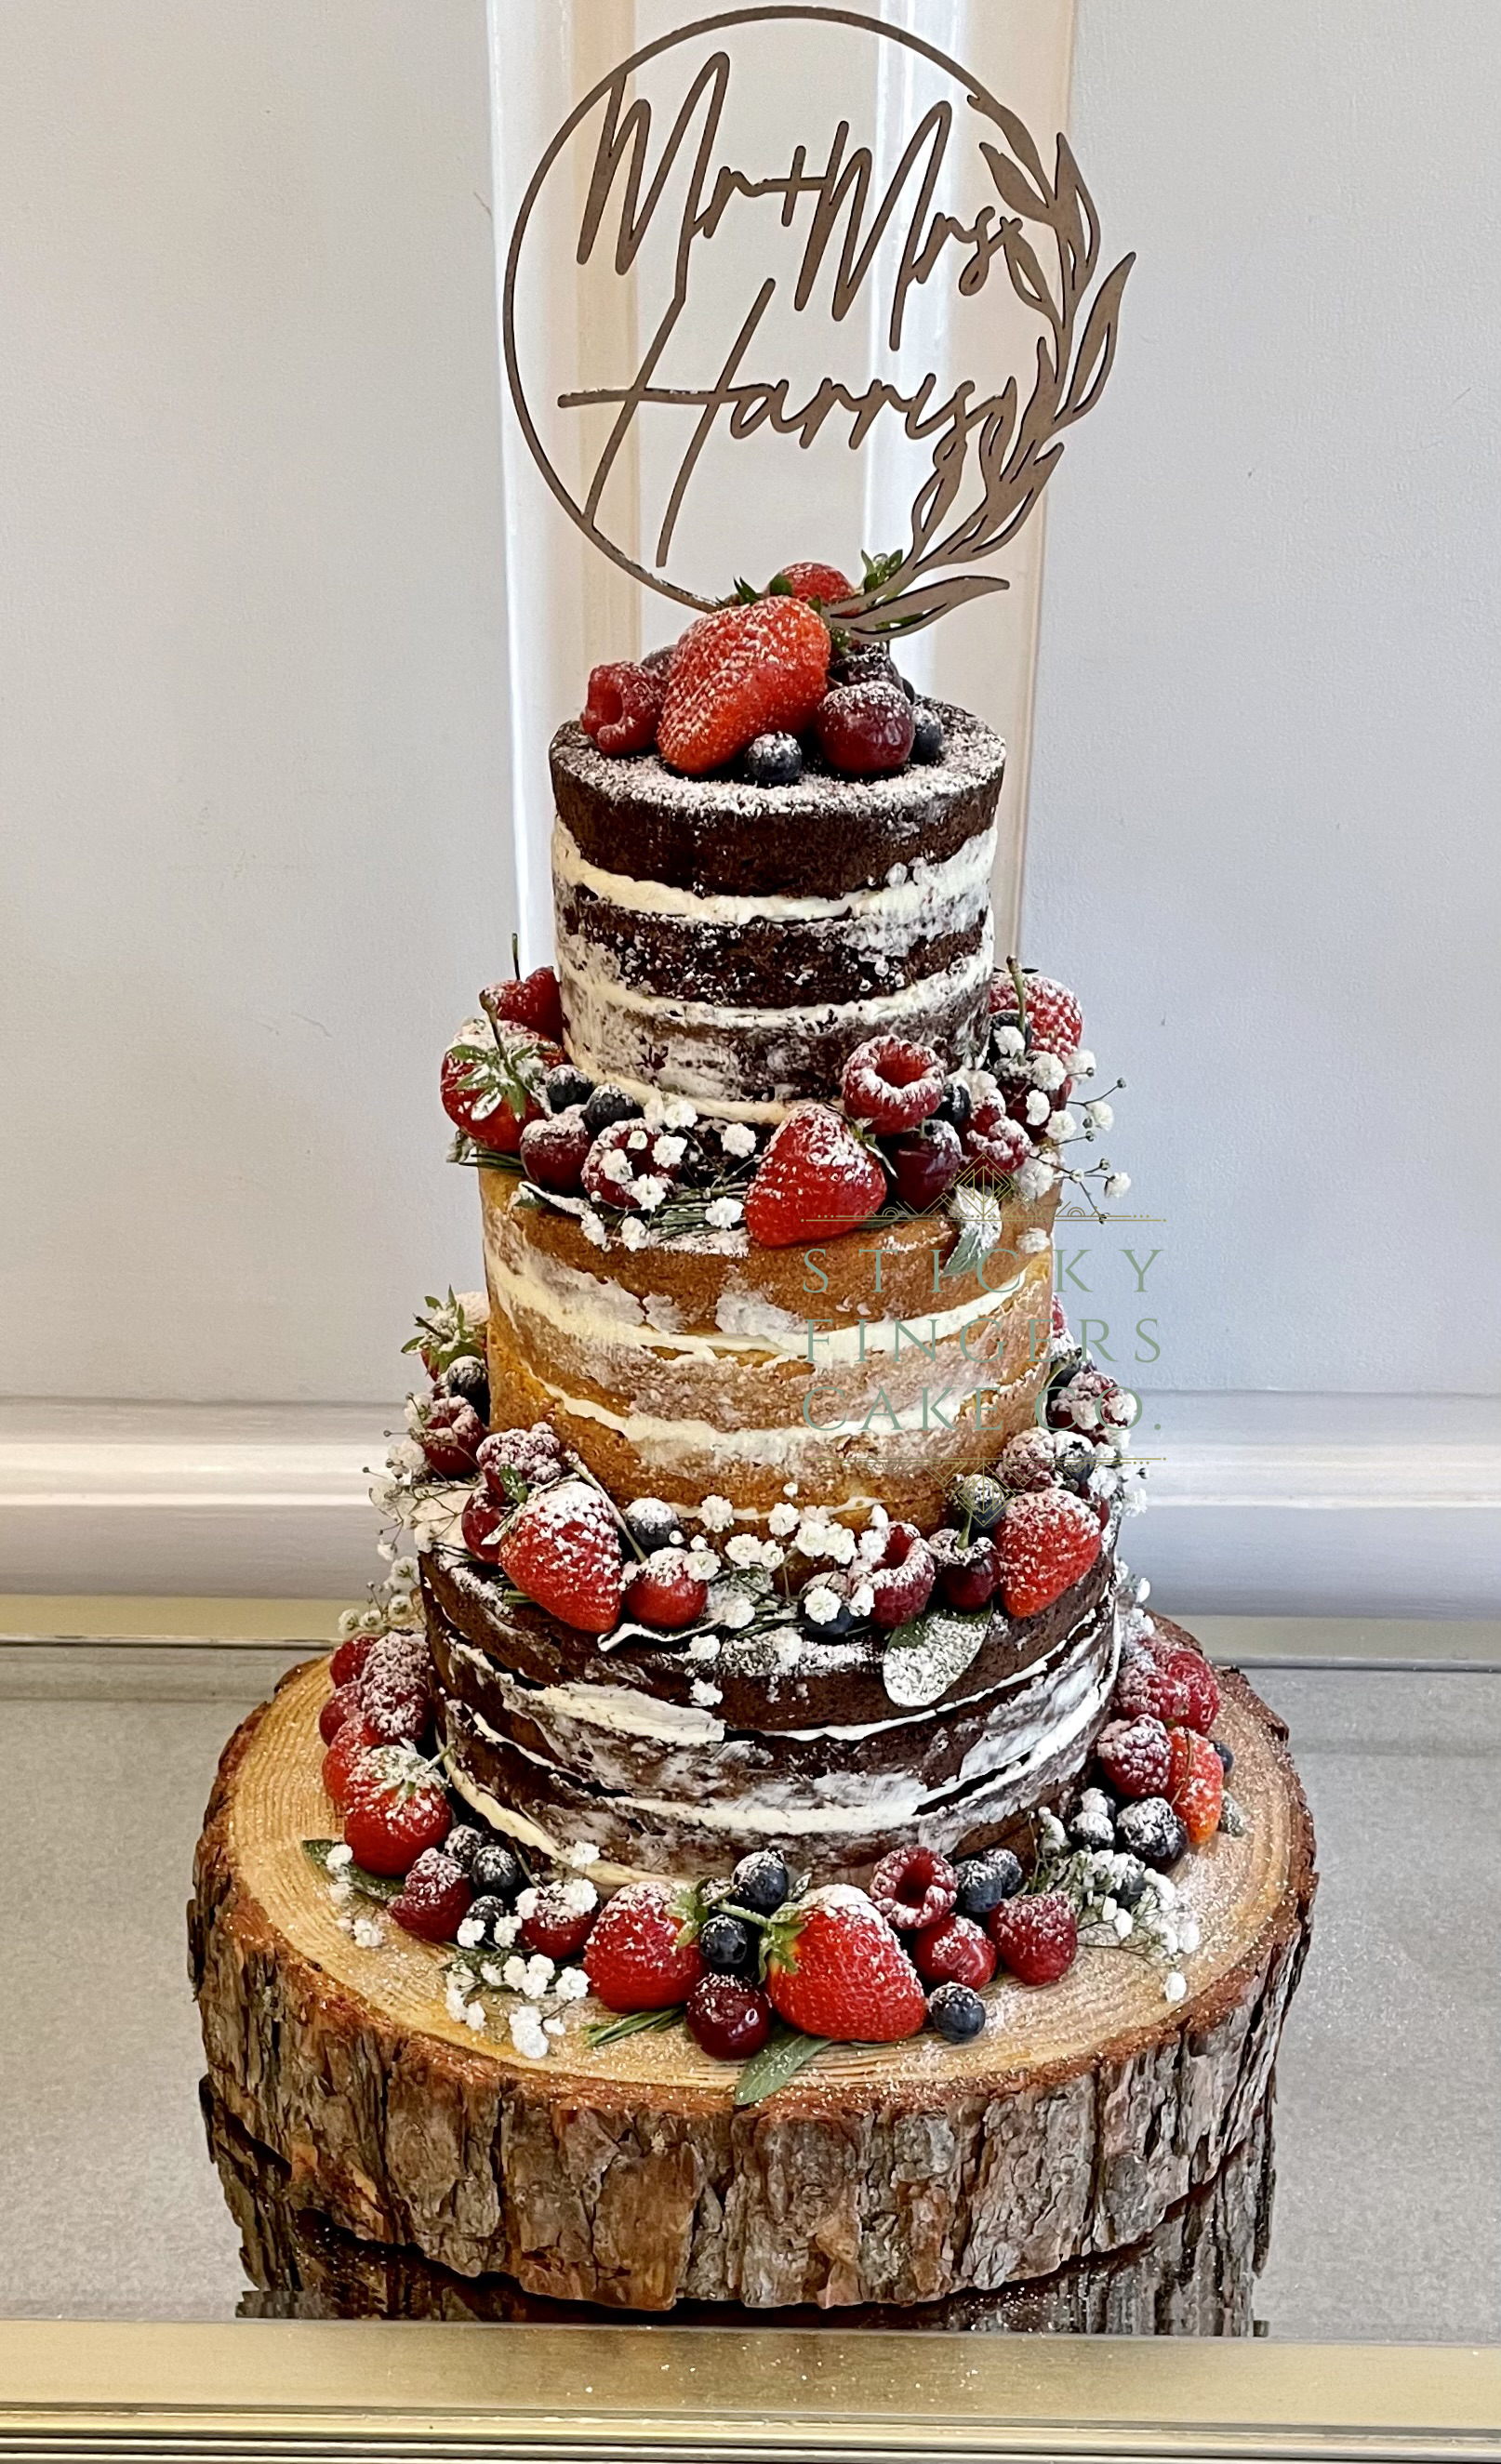 3-tier Naked Wedding Cake, Hutton Hall, Brentwood – June 2022